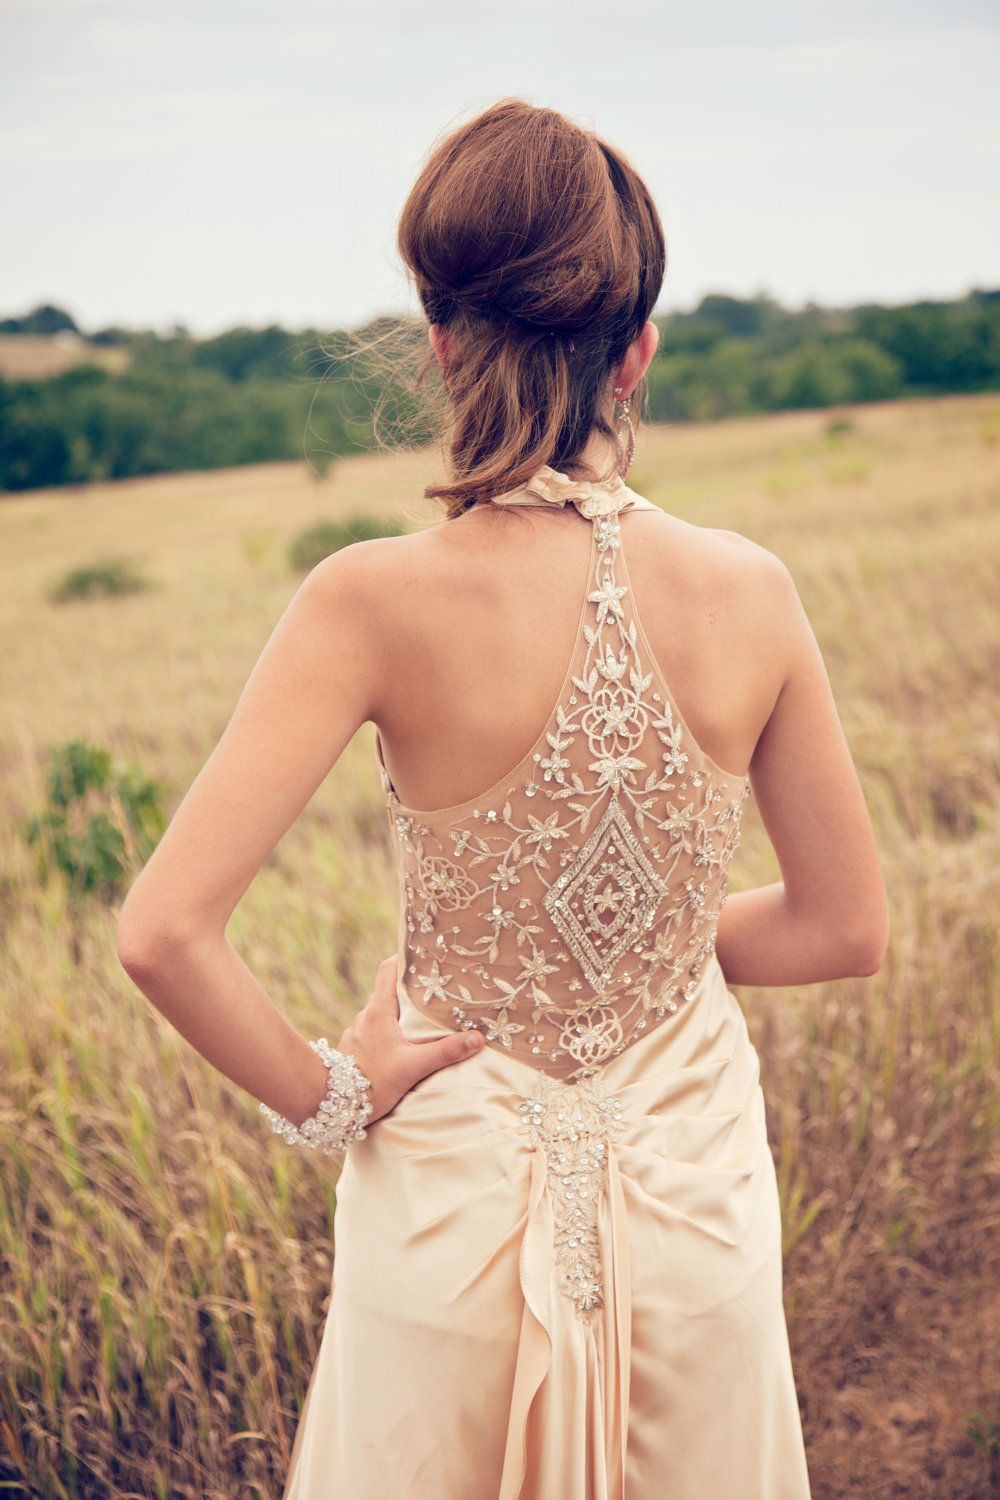 We are swooning over the back detailing in this 1930s Inspired Wedding dress by